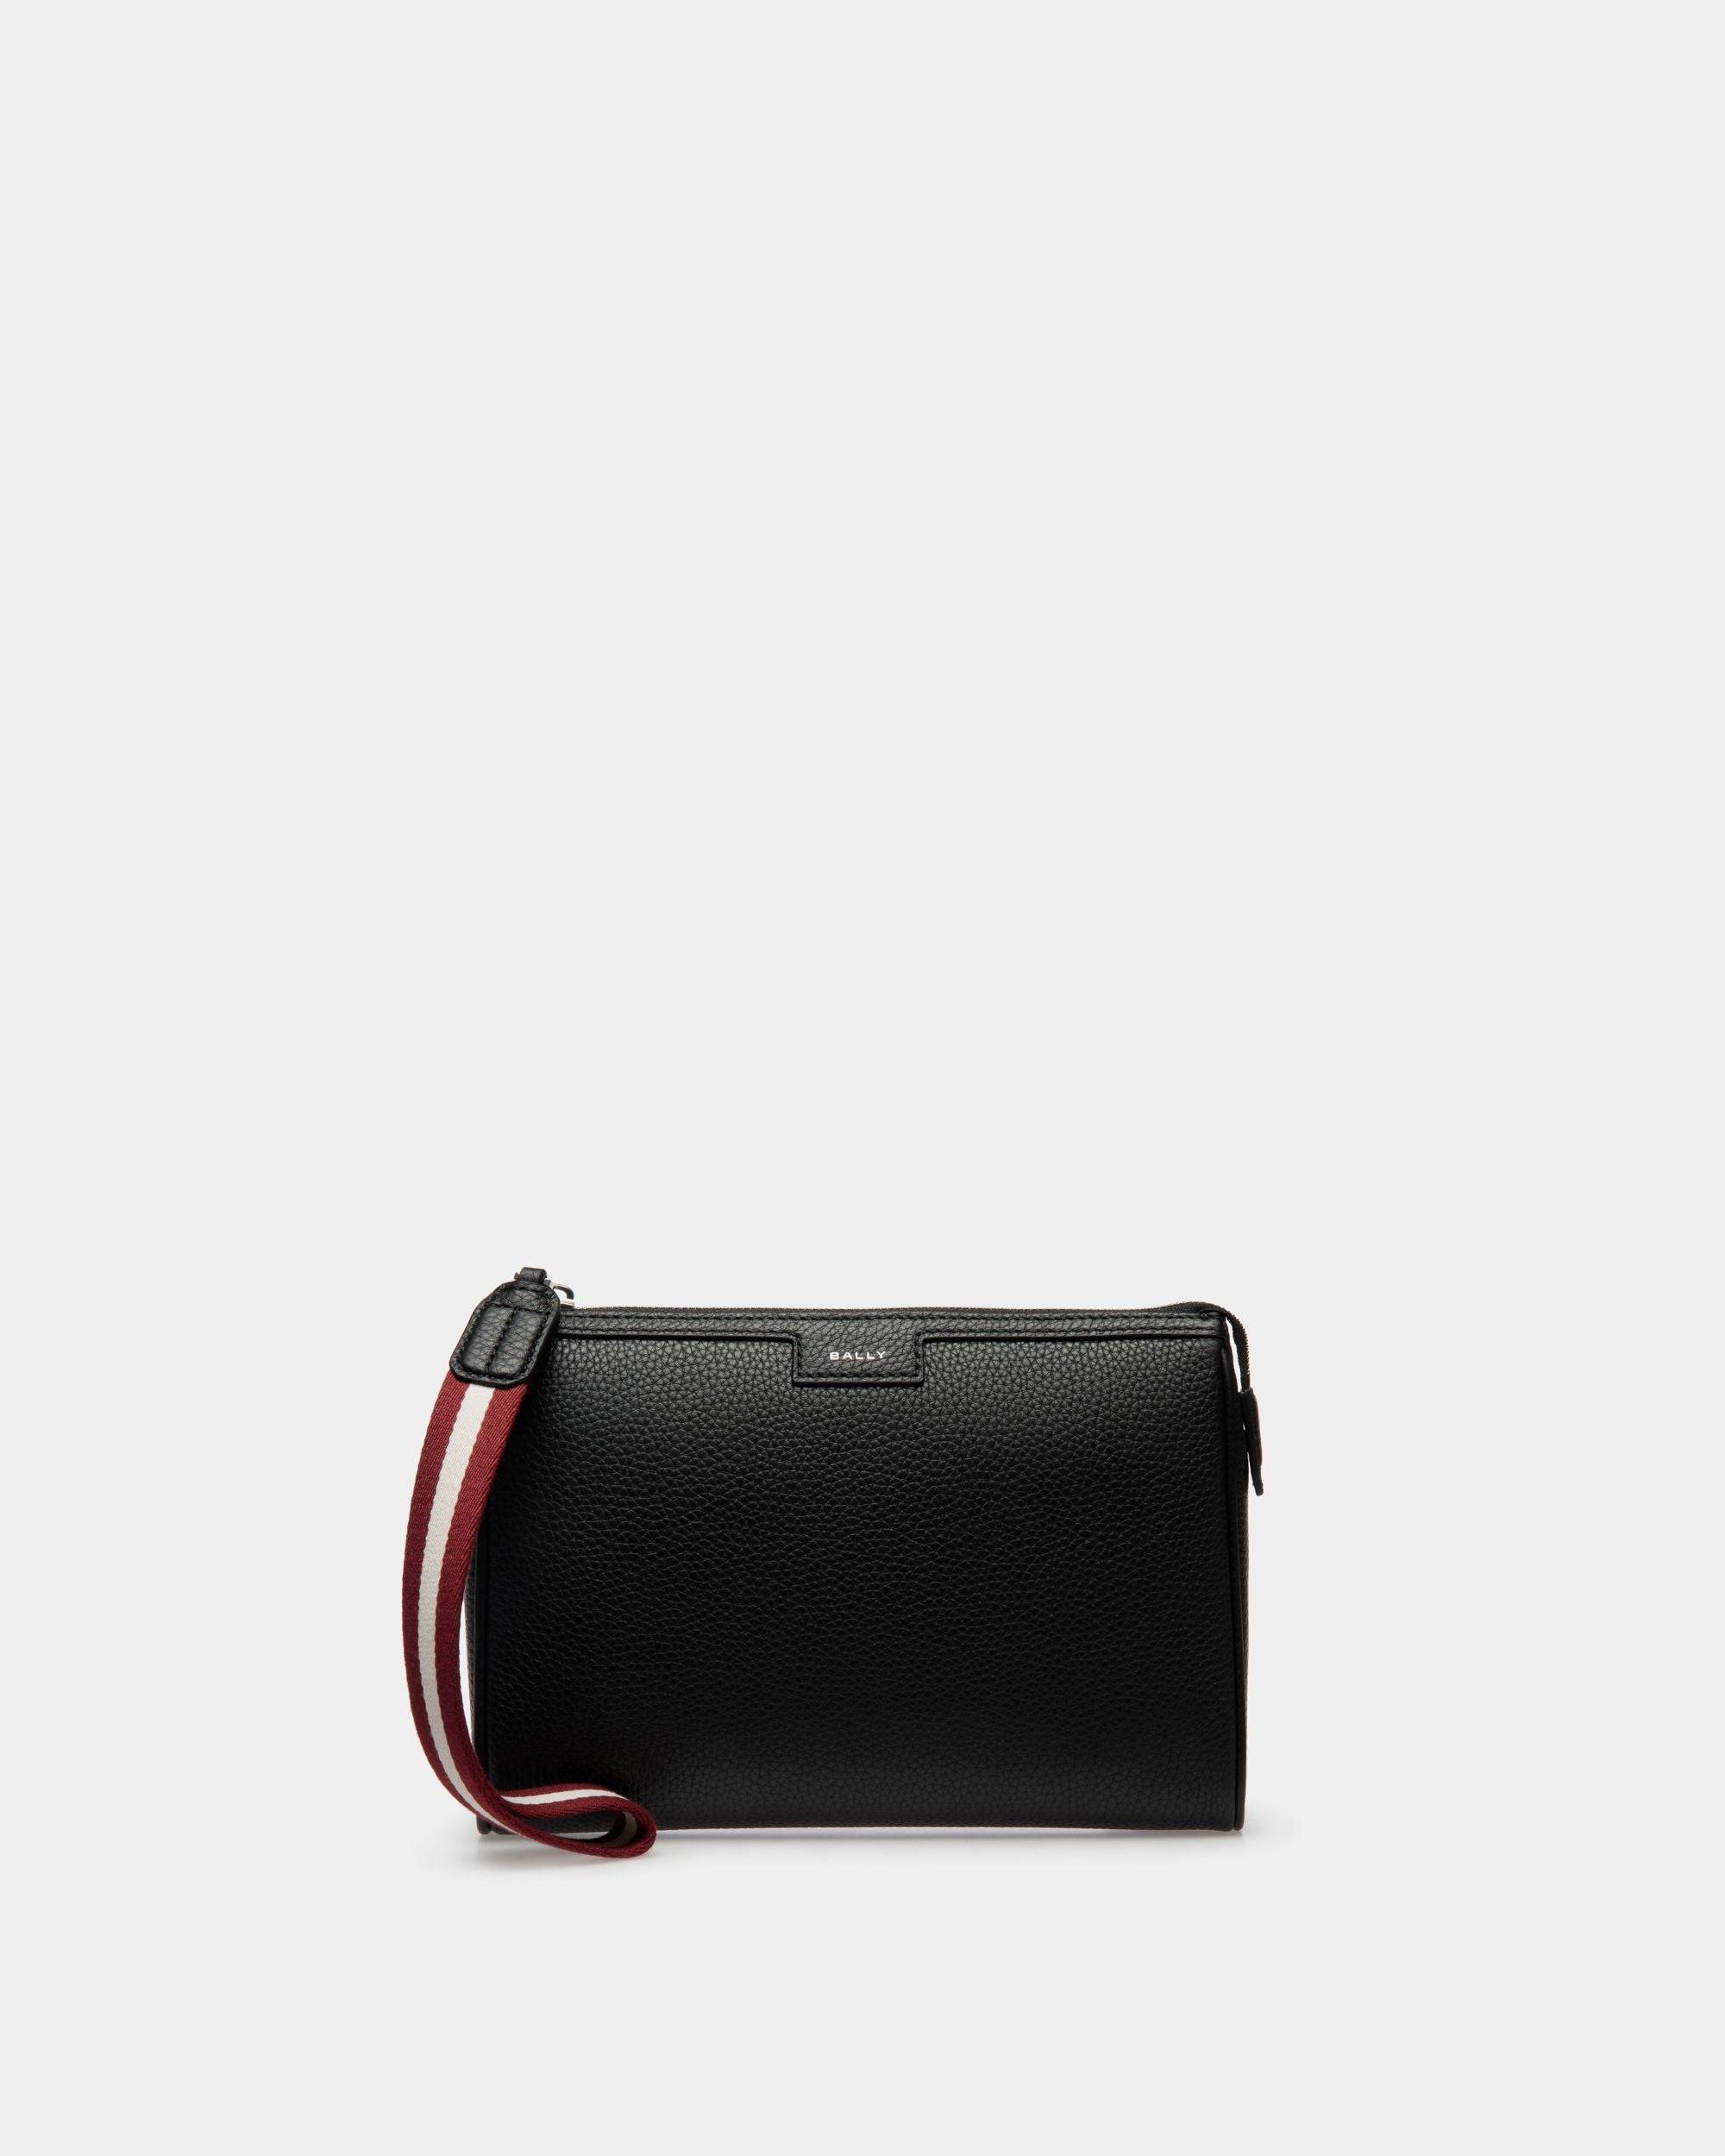 Men's Code Pouch In Black Grained Leather | Bally | Still Life Front